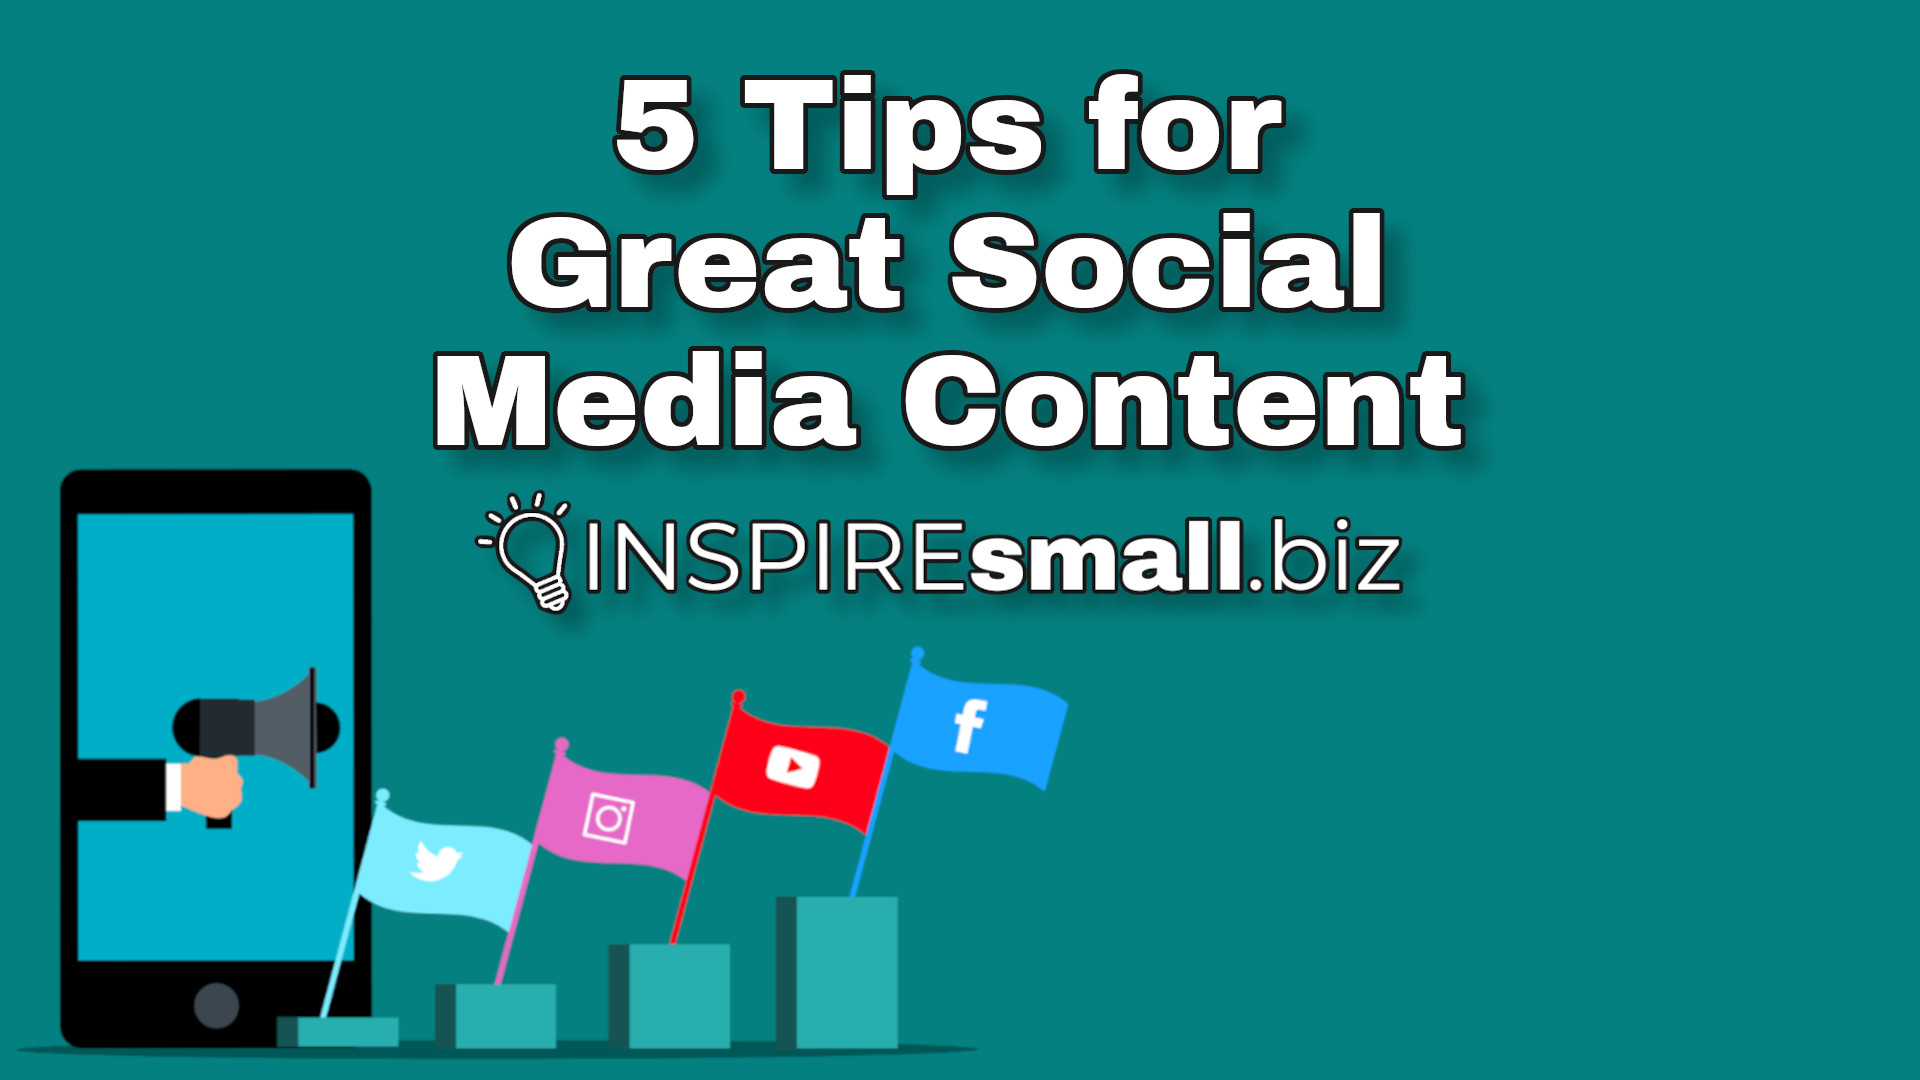 5 Tips for Great Social Media Content with an image of a hand coming out of a smartphone next to pillars with social media flags on them